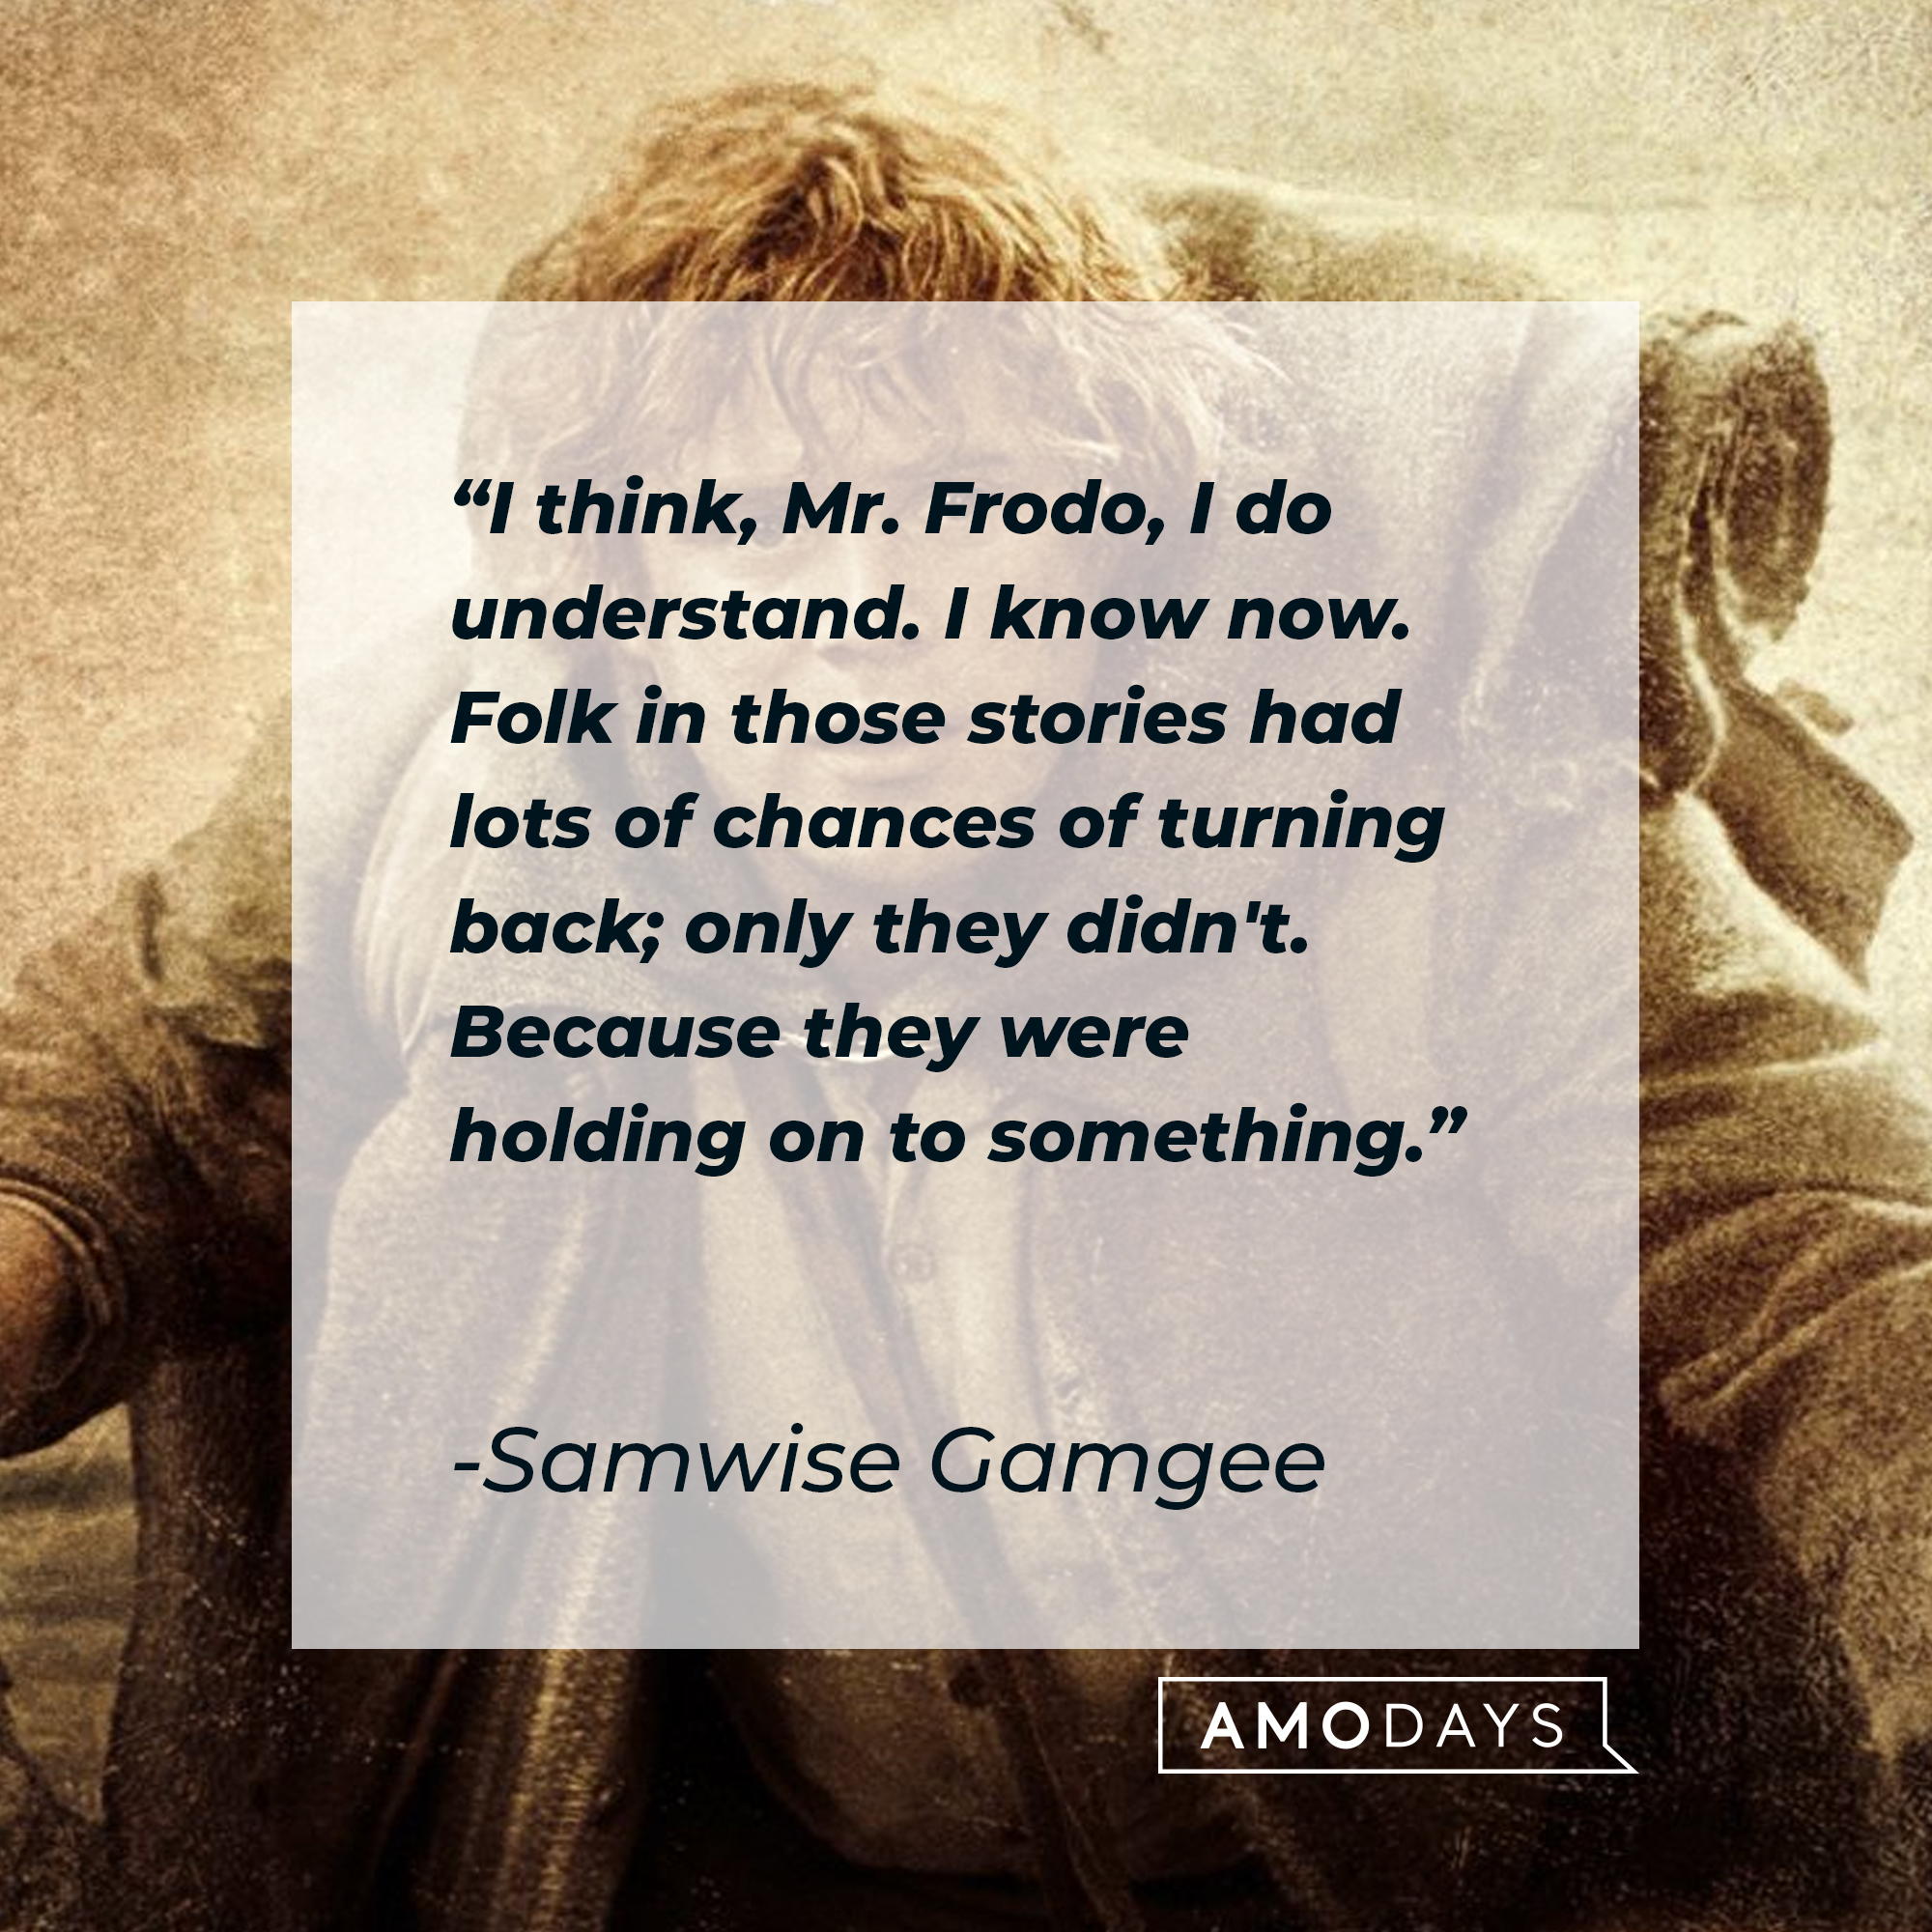 Samwise Gamgee with his quote from "The Lord of the Rings:" "I think, Mr. Frodo, I do understand. I know now. Folk in those stories had lots of chances of turning back; only they didn't. Because they were holding on to something." | Source: Facebook/lordoftheringstrilogy